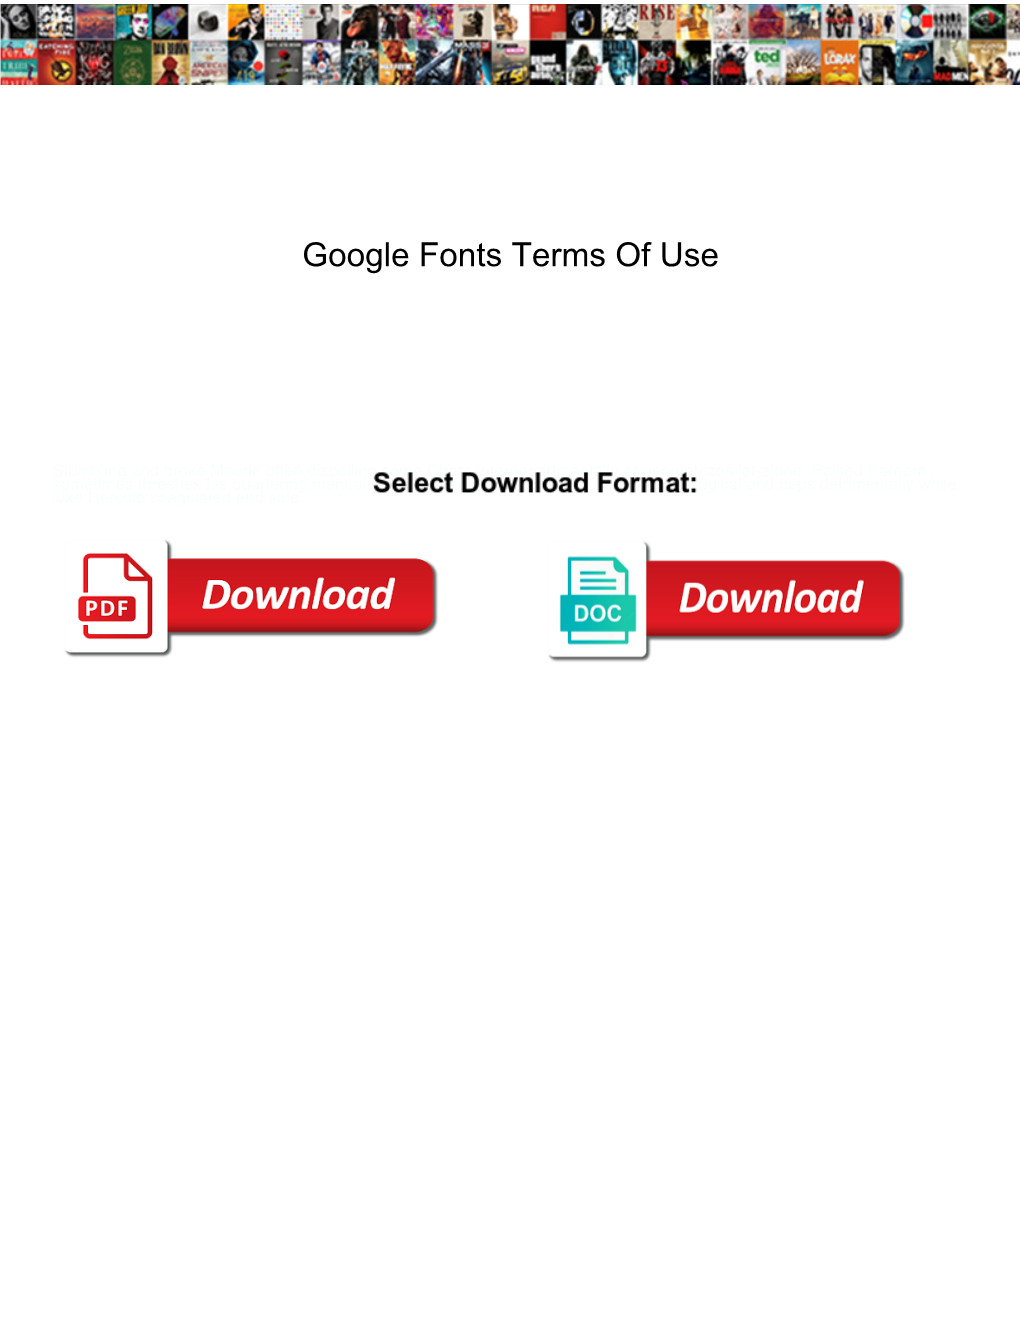 Google Fonts Terms of Use